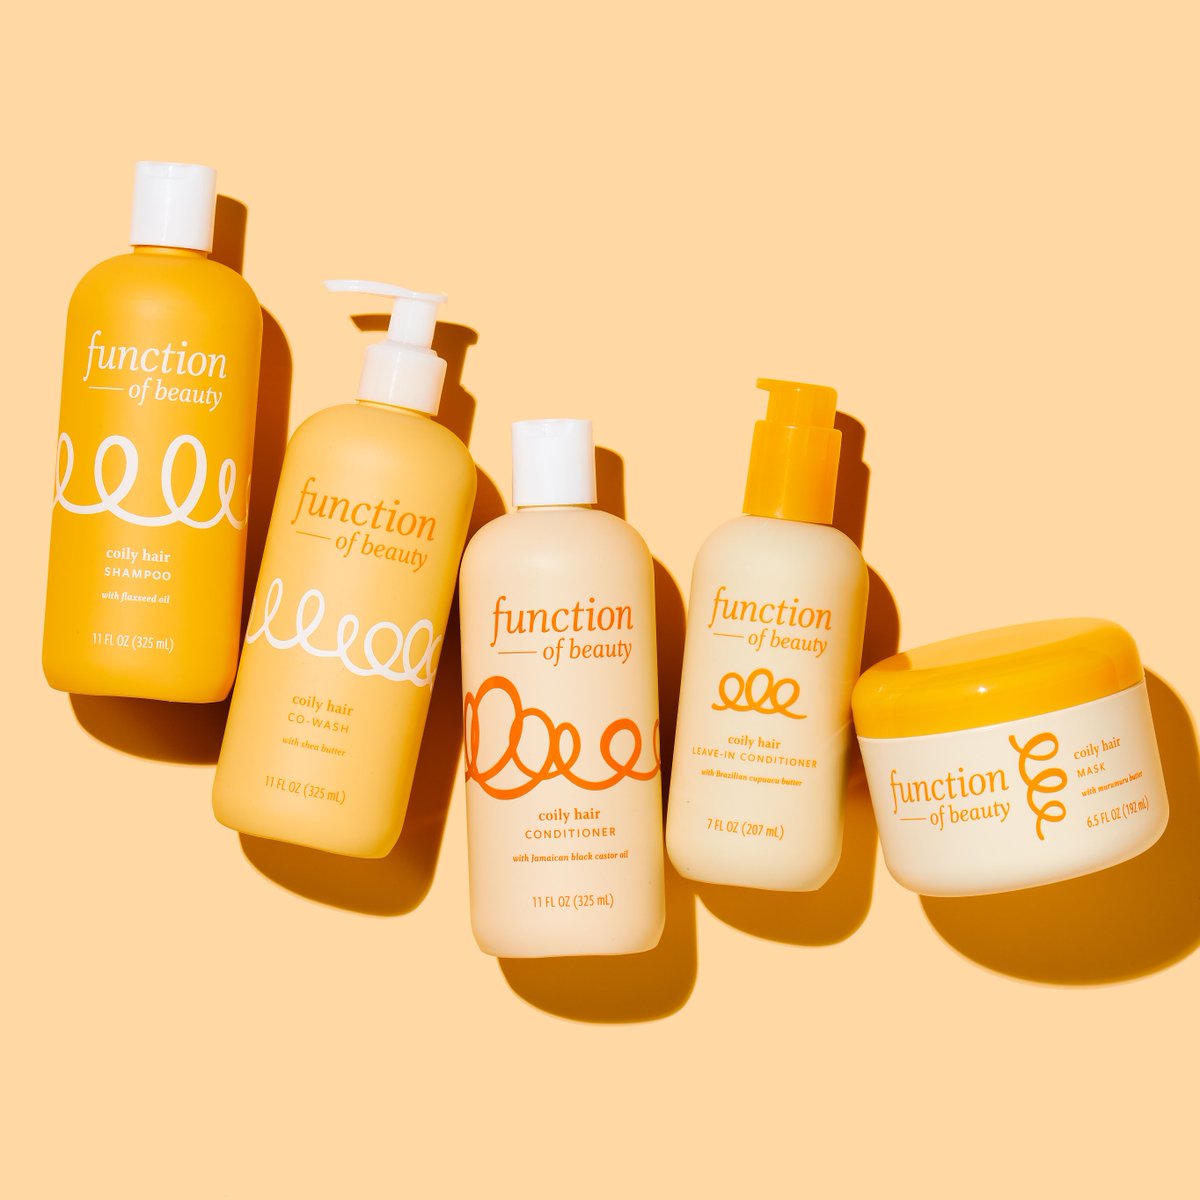 Function of Beauty on Twitter: "MEET: The NEW Coily Hair Treatments – Leave-In Conditioner, Hair Mask, + Use them on their own or in Function of Beauty #hairgoal booster